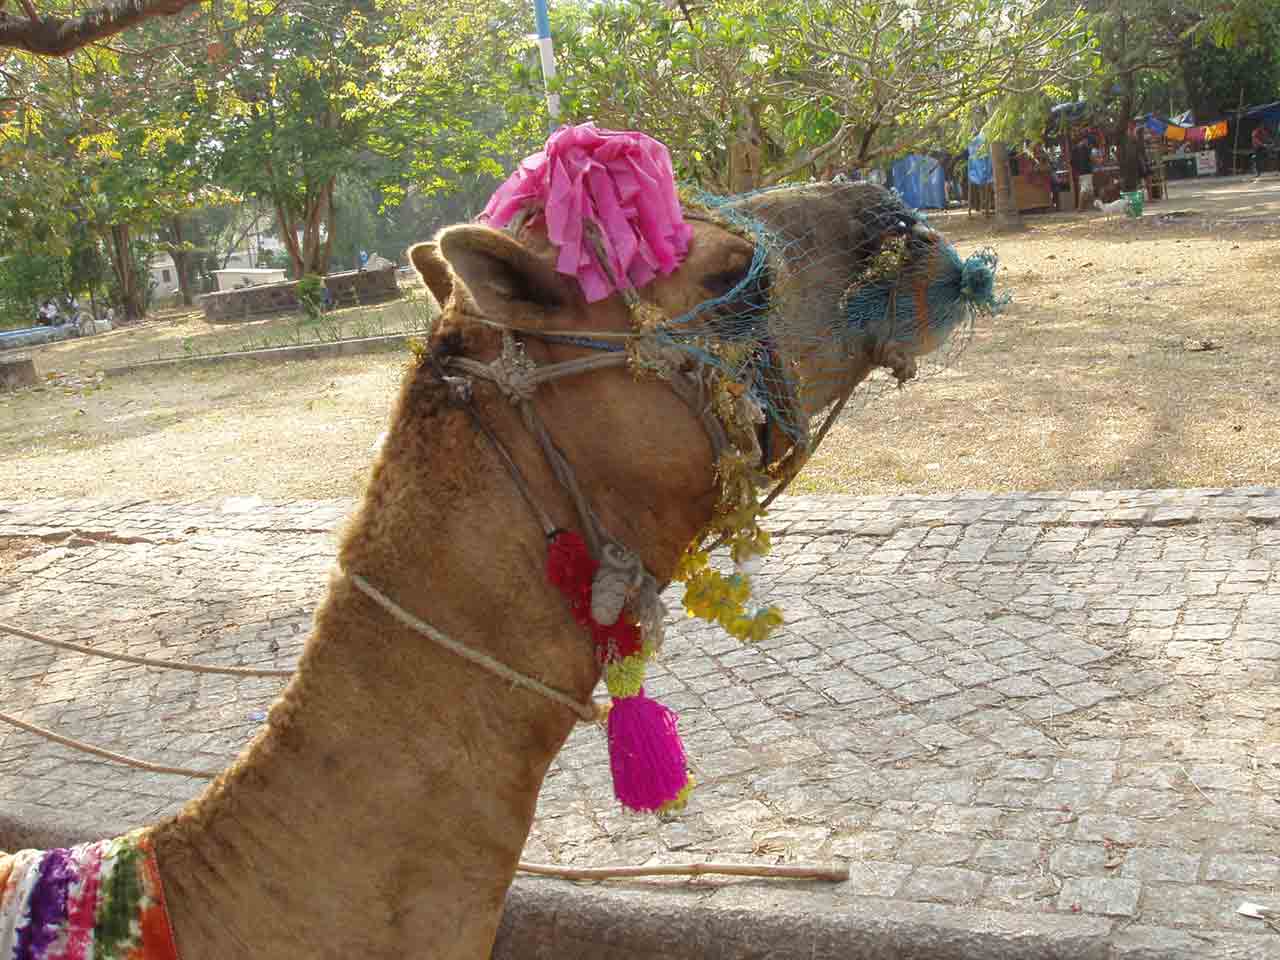 Camel with embellishments